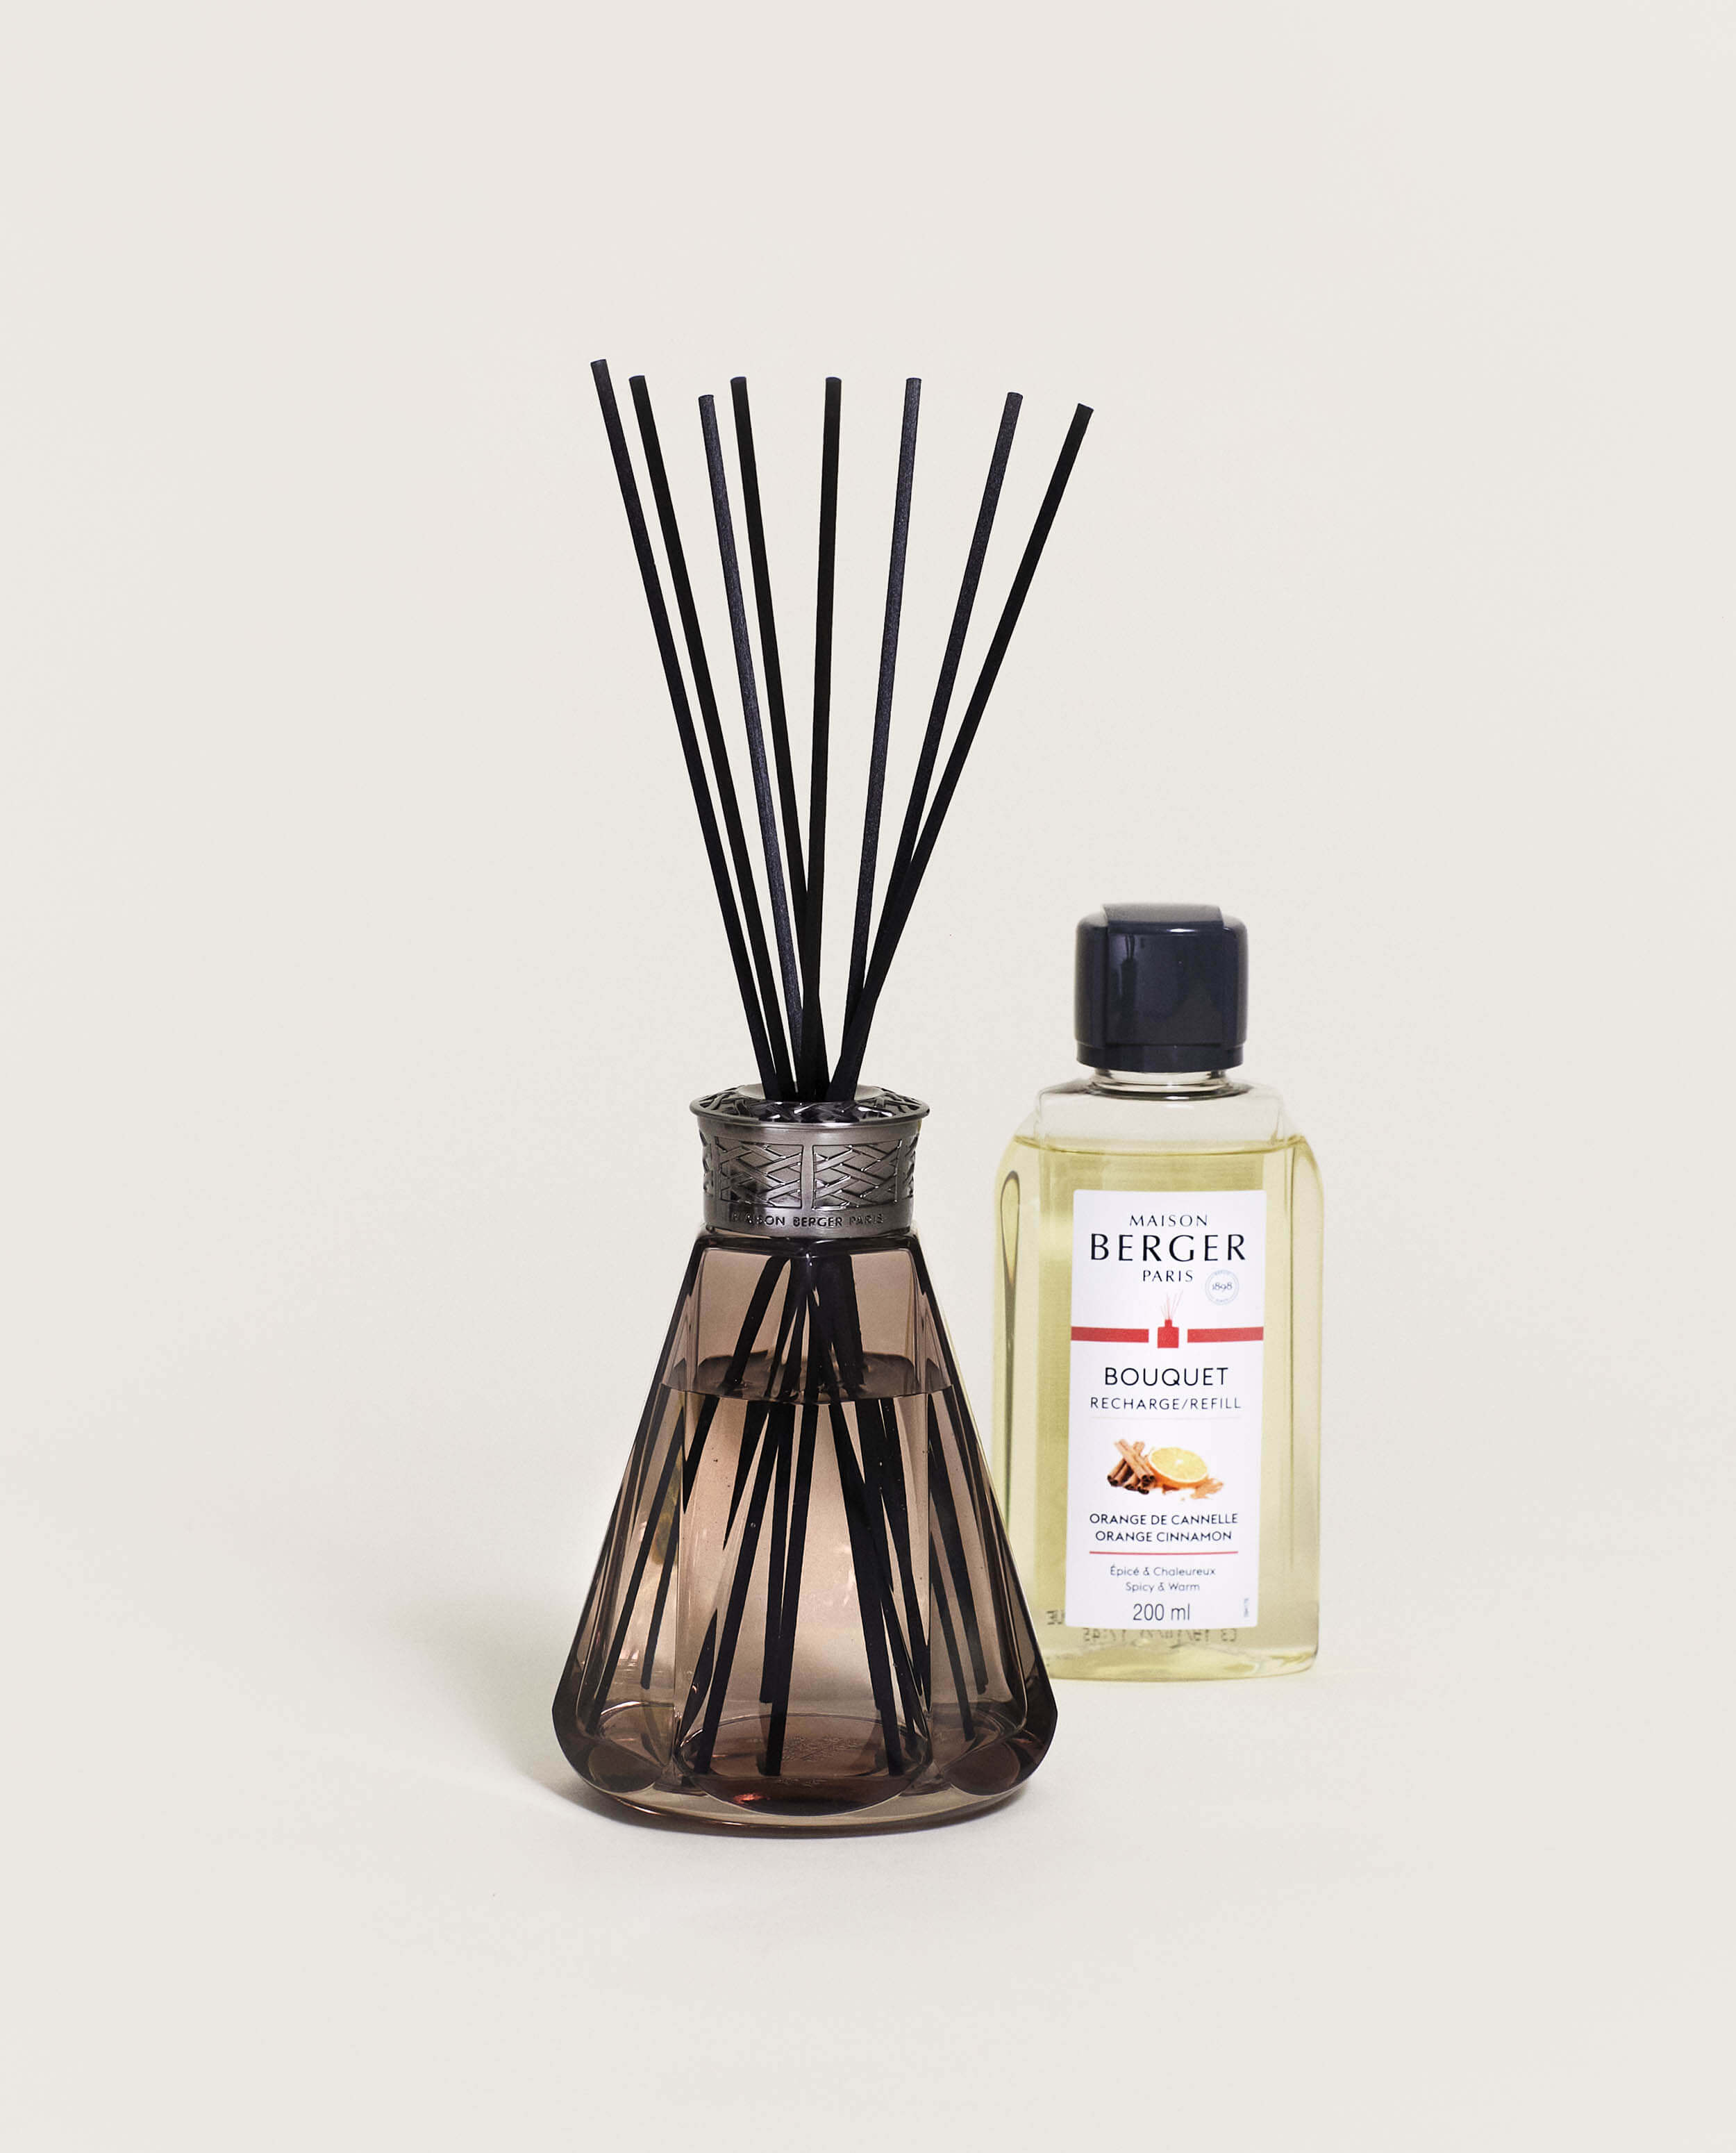 MAISON BERGER So Neutral - Lampe Berger Fragrance Refill for Home Fragrance  Oil Diffuser - 180 milliliters - 6.08 Fluid Ounces